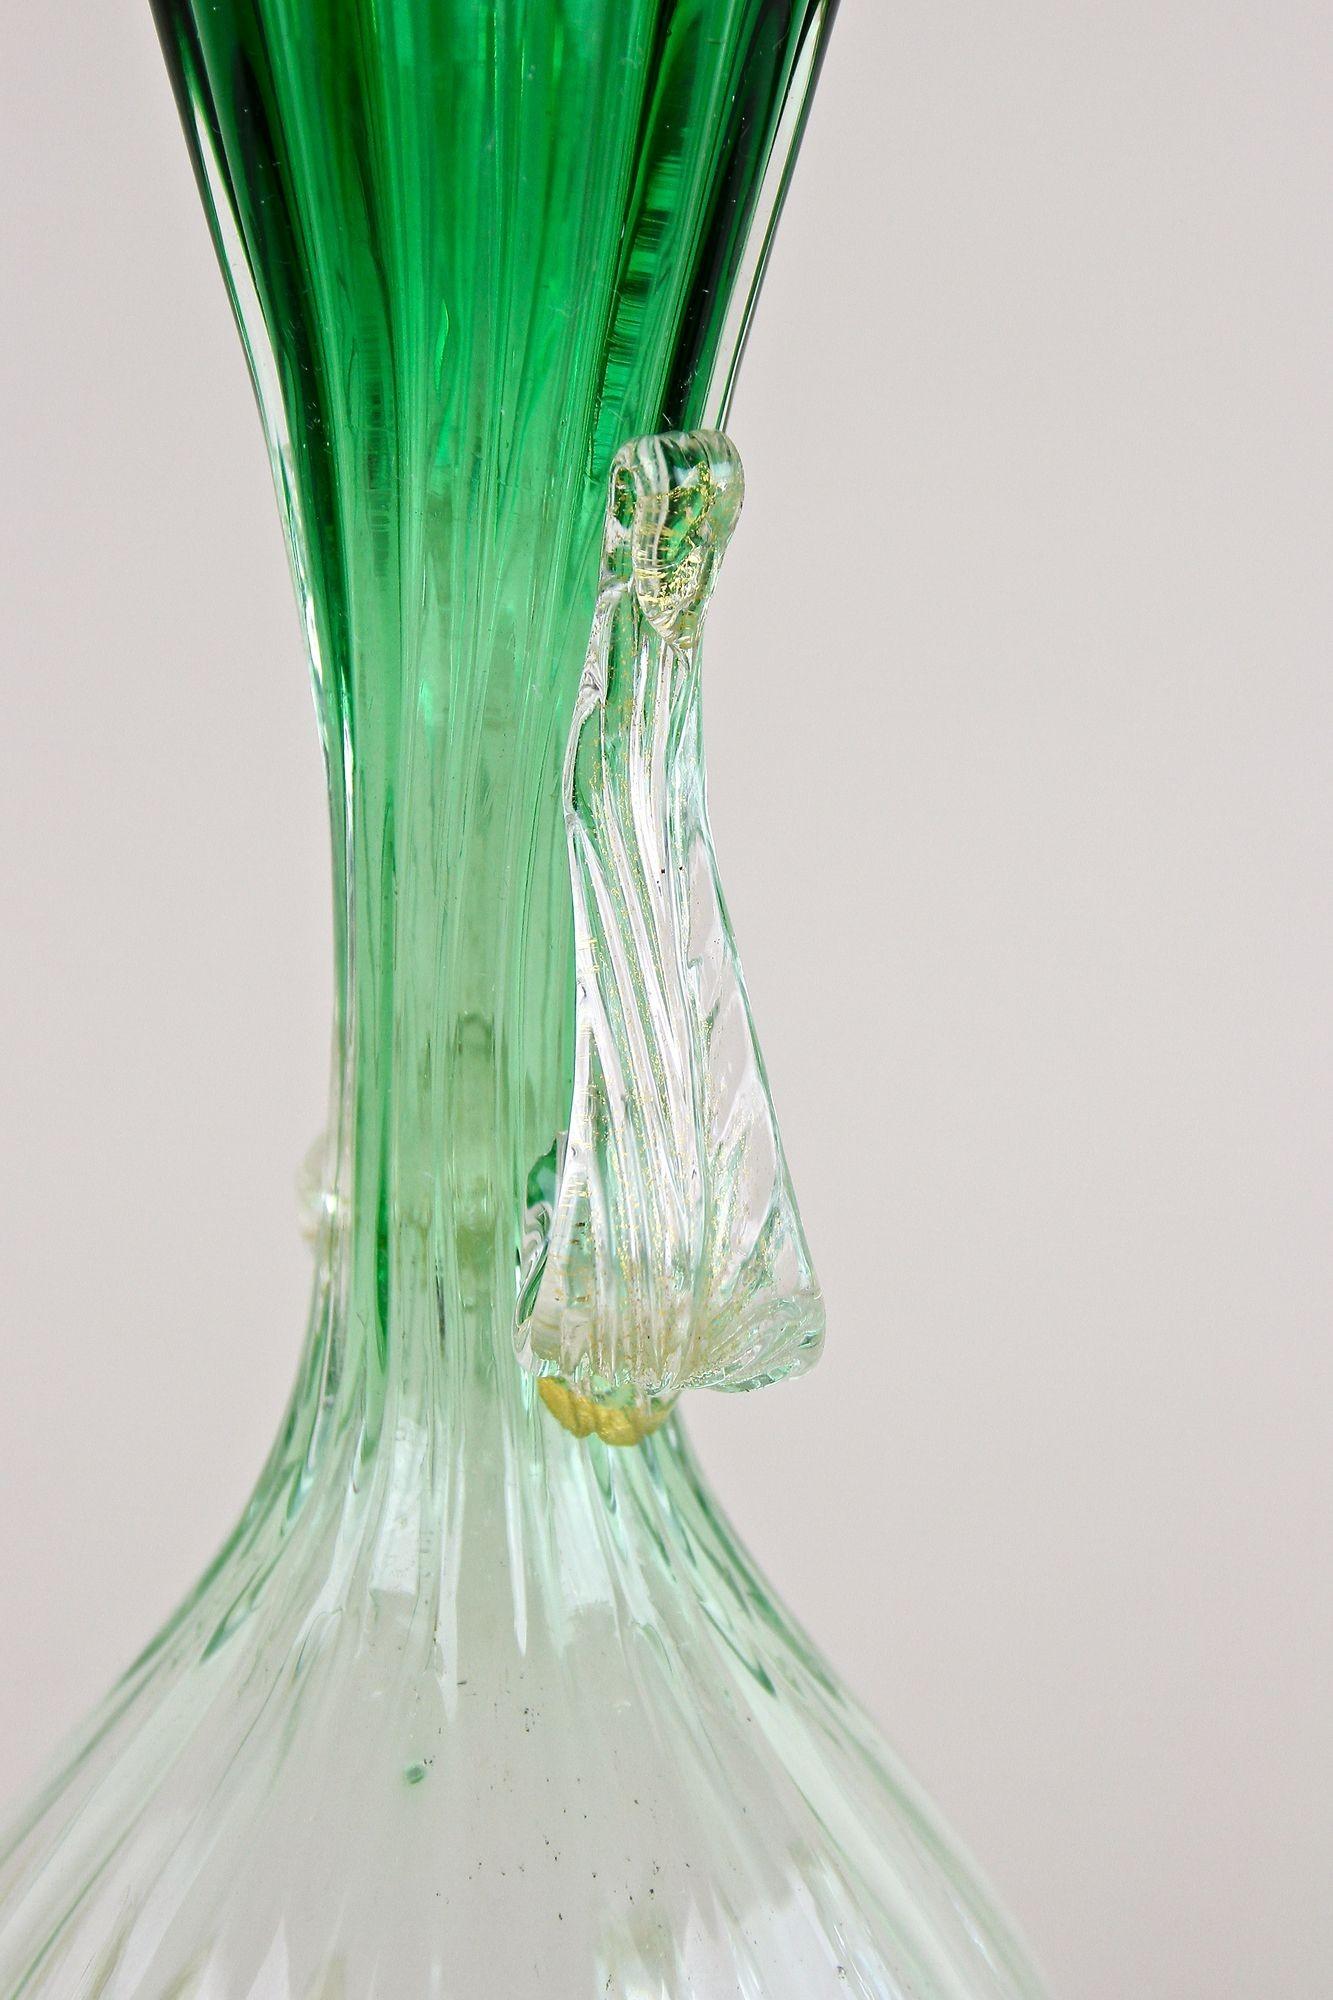 Green/ White Murano Glass Vase With 24k Gold Flakes by Fratelli Toso, IT ca 1930 For Sale 11